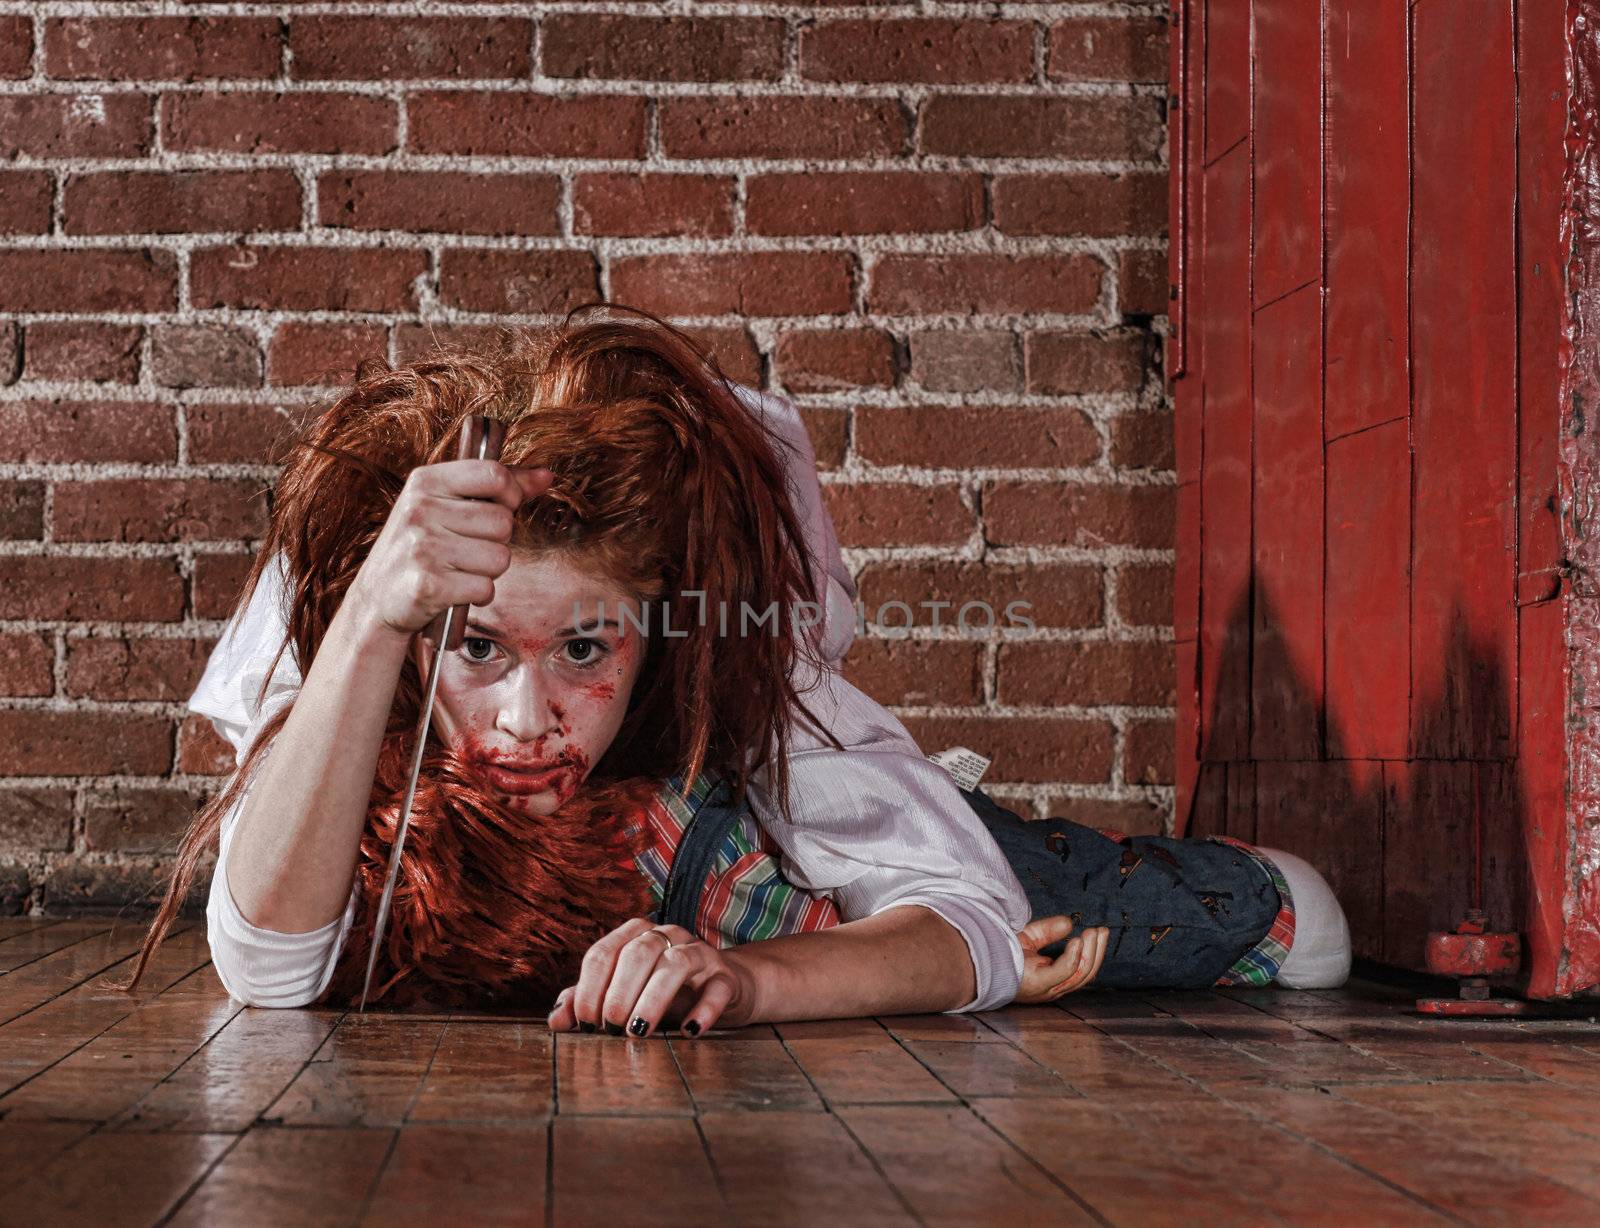 Woman in Horror Situation With Bloody Face